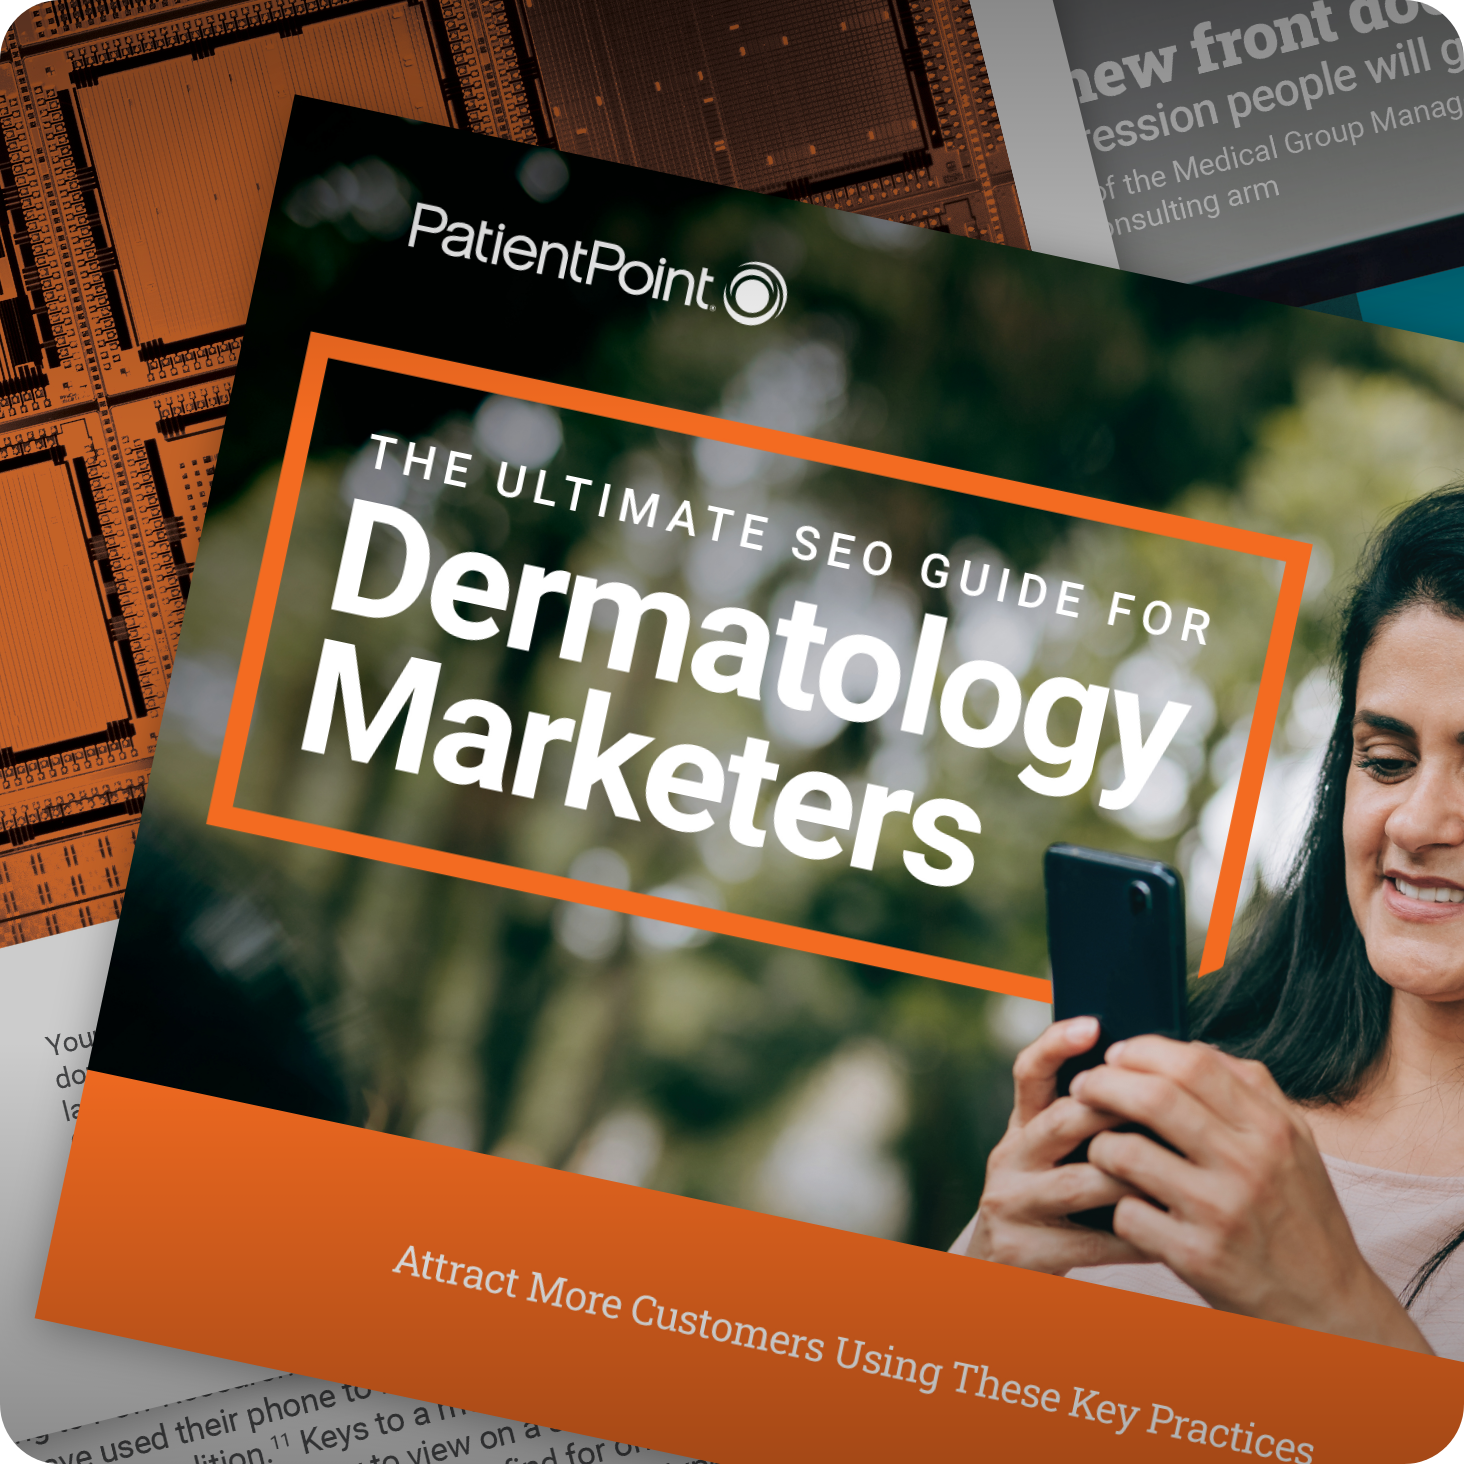 The Ultimate SEO Guide for Dermatology Marketers